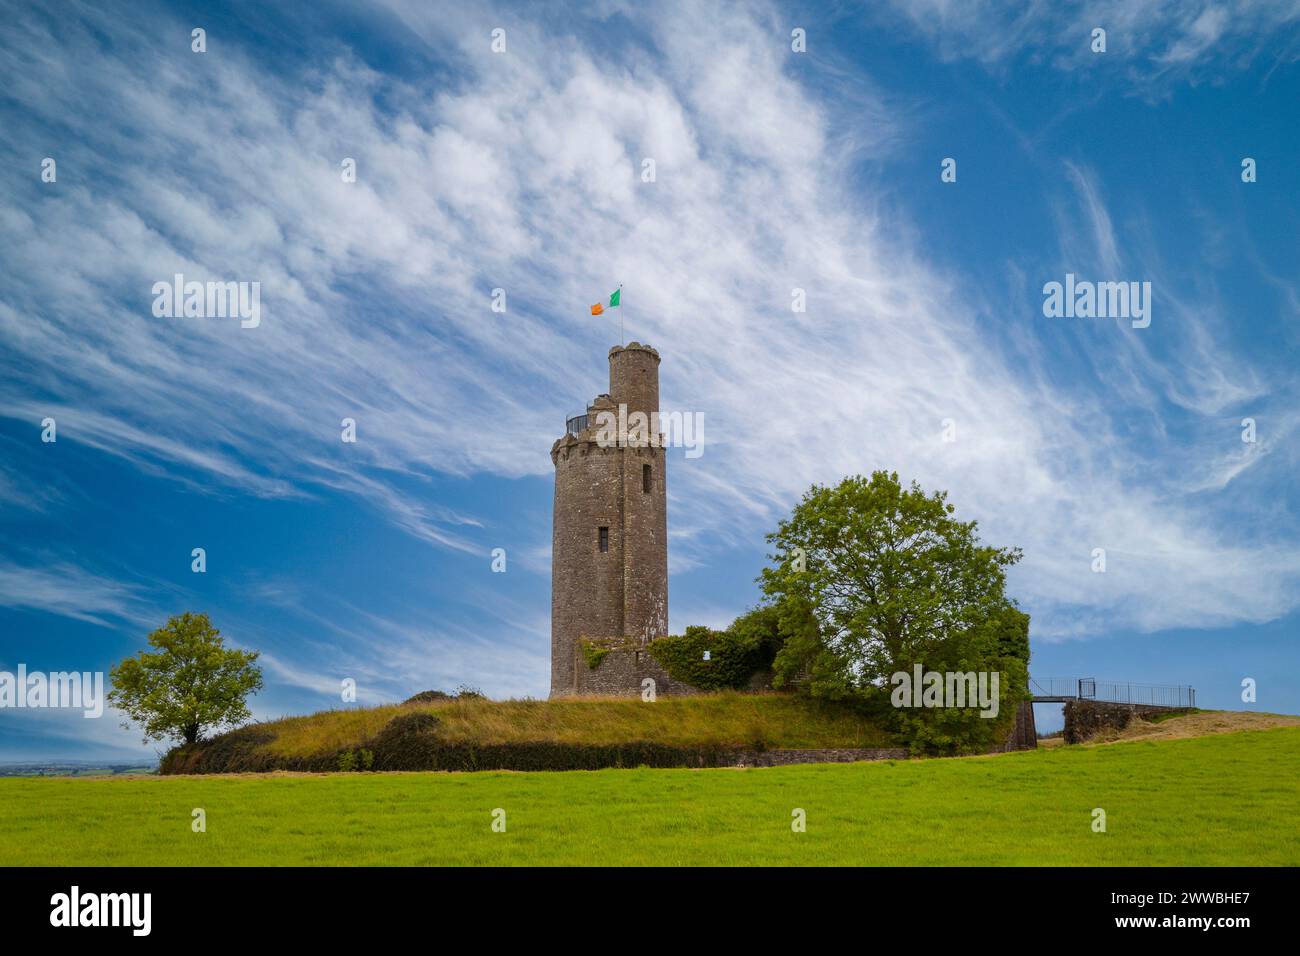 The old folly tower in Ballyfin demesne in County Laois, built by Sir Richard and William Vitruvius Morrison in the 1820s. Stock Photo